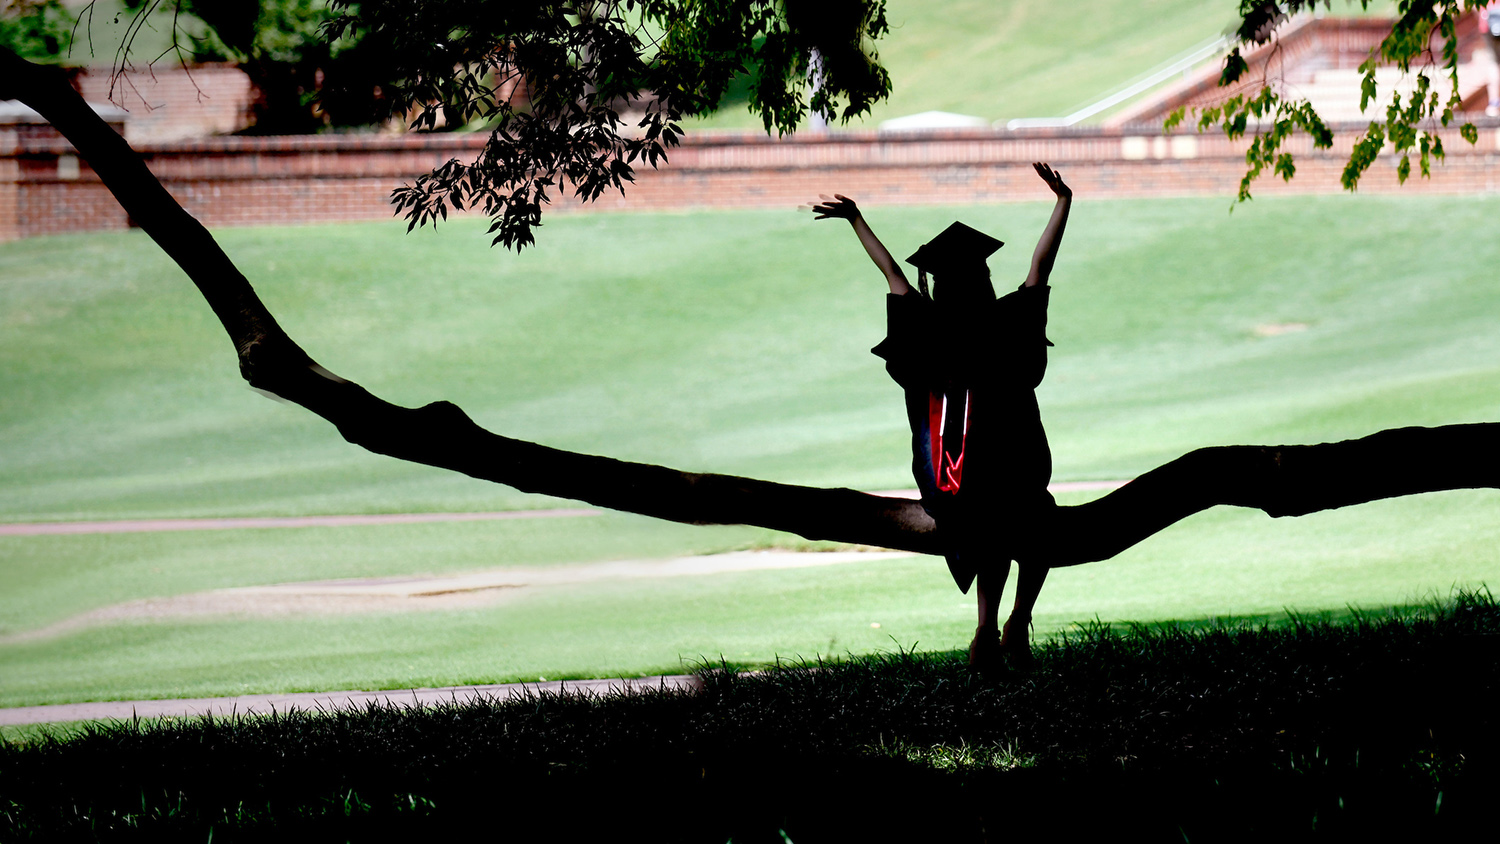 A graduate student poses for photos at the Court of North Carolina.